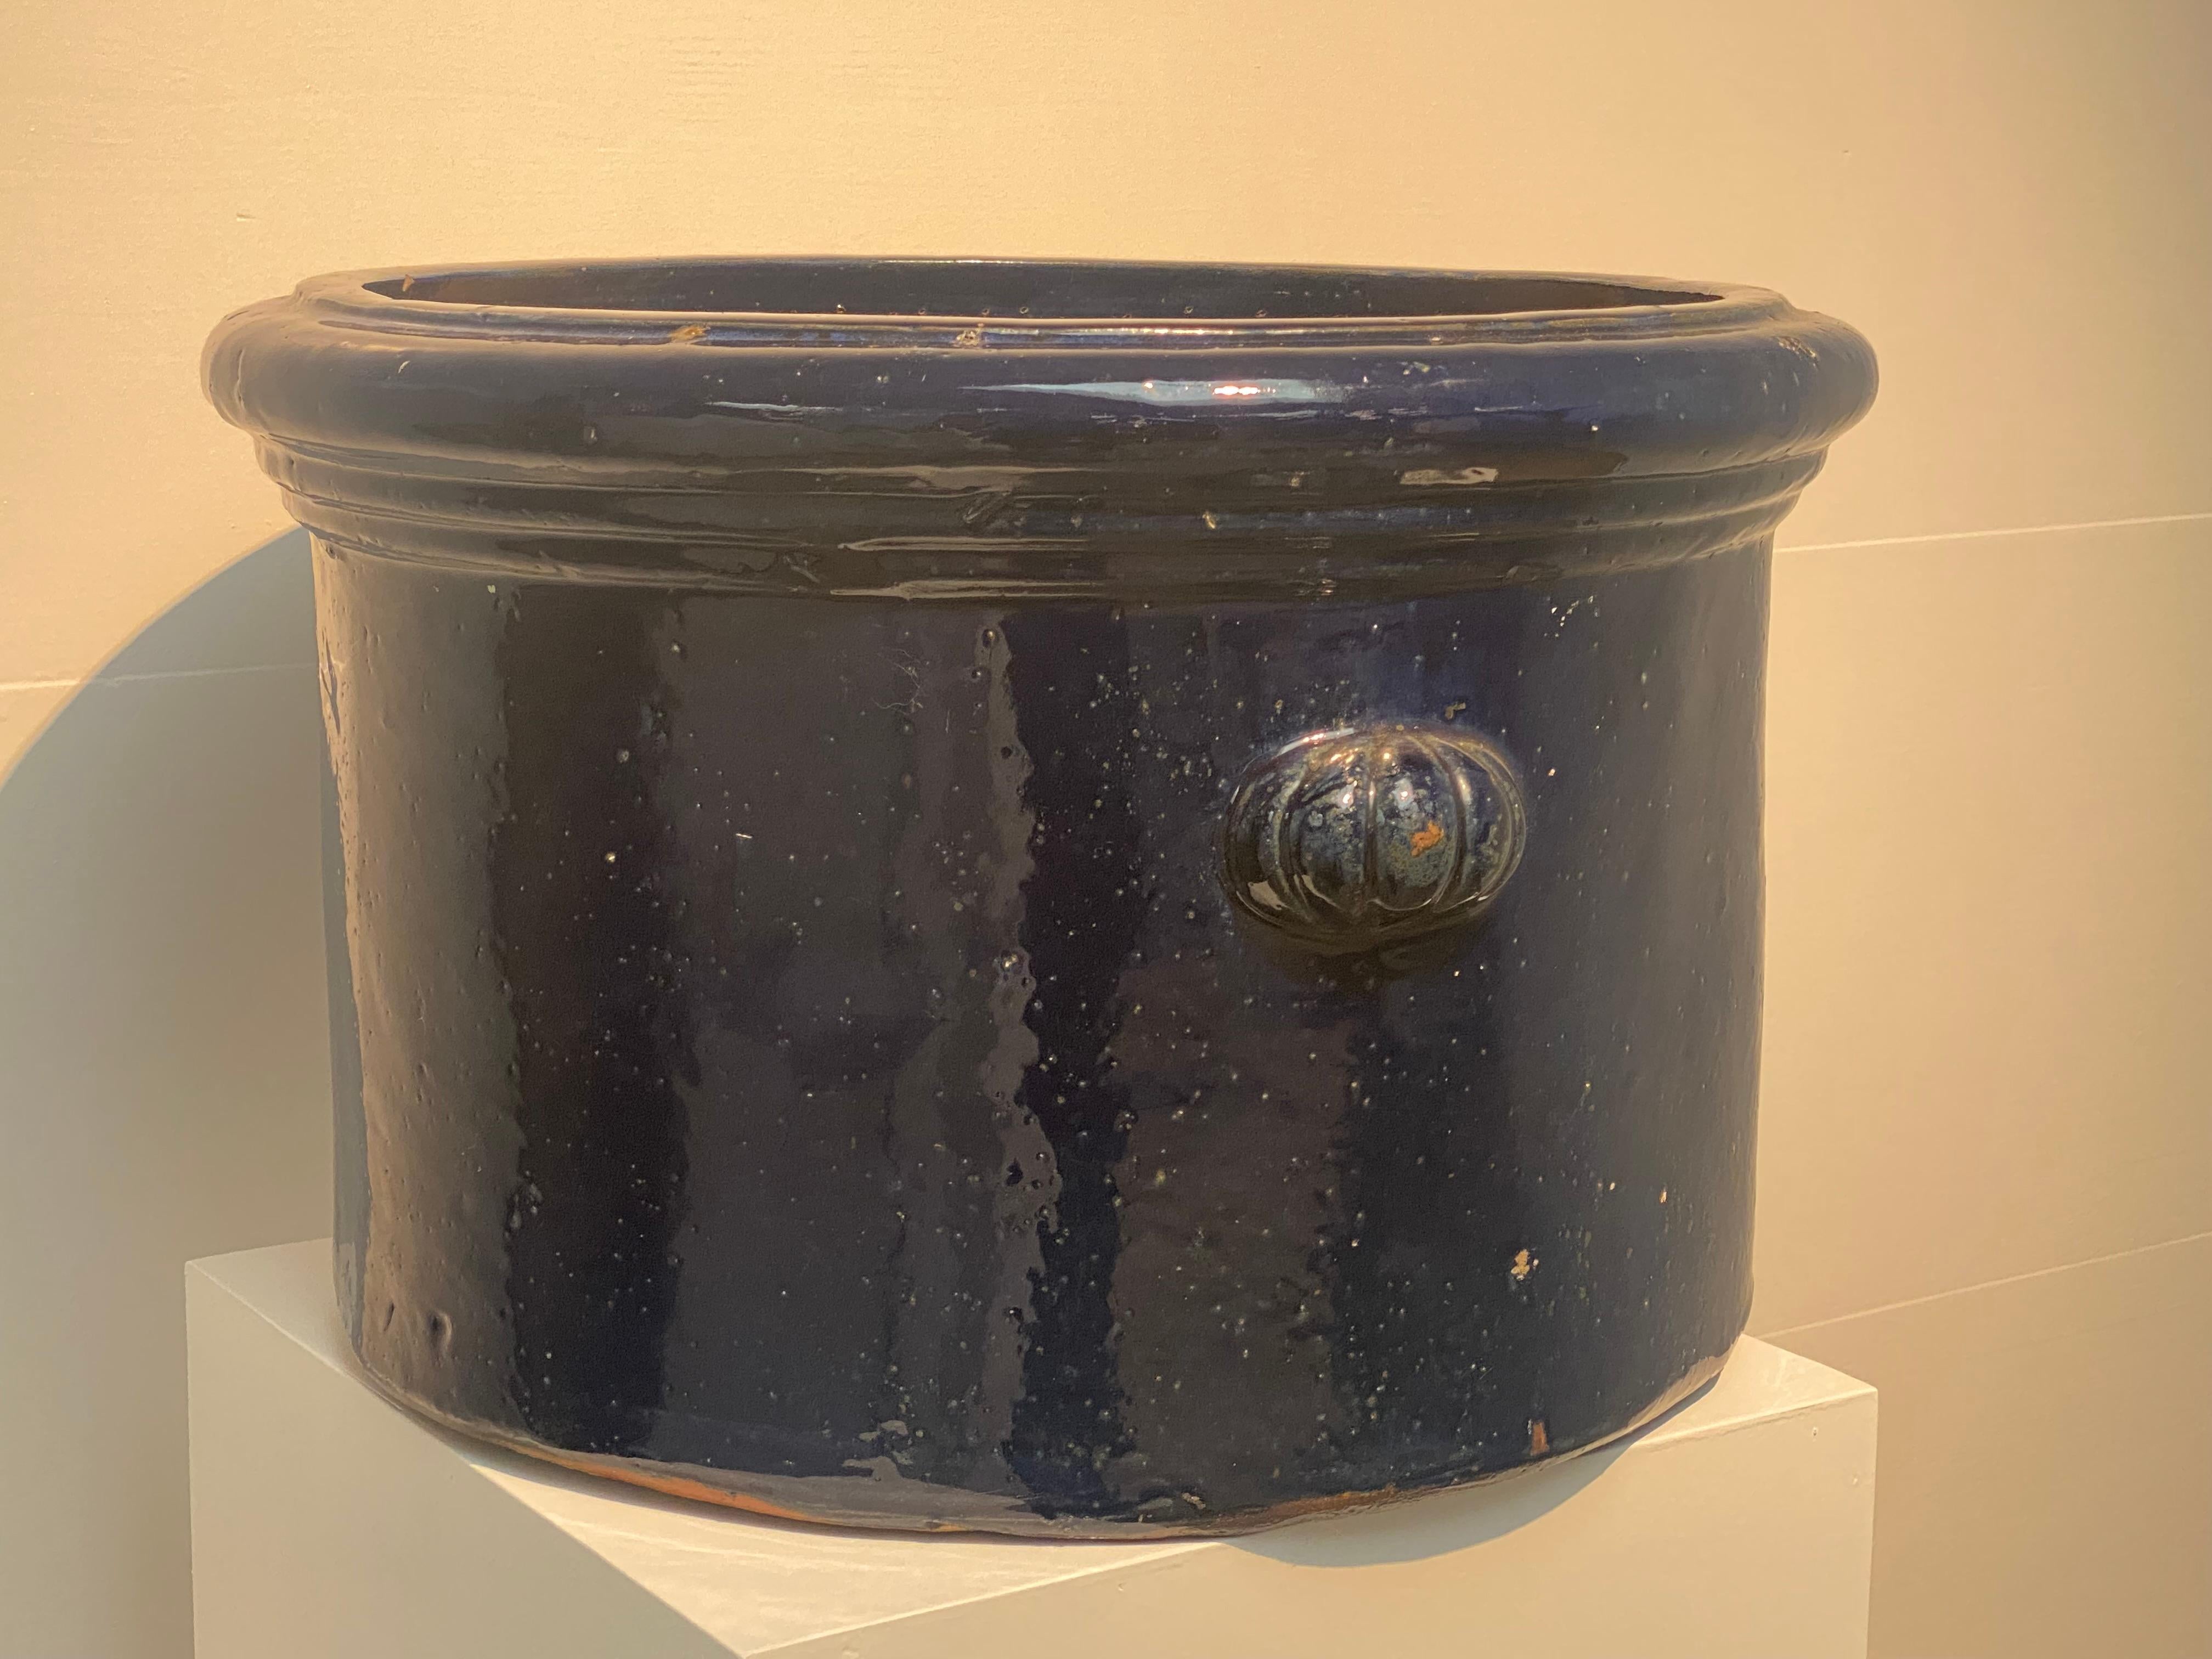 An elegant Vintage and brutalist Terracotta Planter in an
dark Blue Color, Spain from around the 1970 ies,
nice circular form, simple design with just to handles,
warm shine and patina of the glazed terracotta,
to be used inside as well as